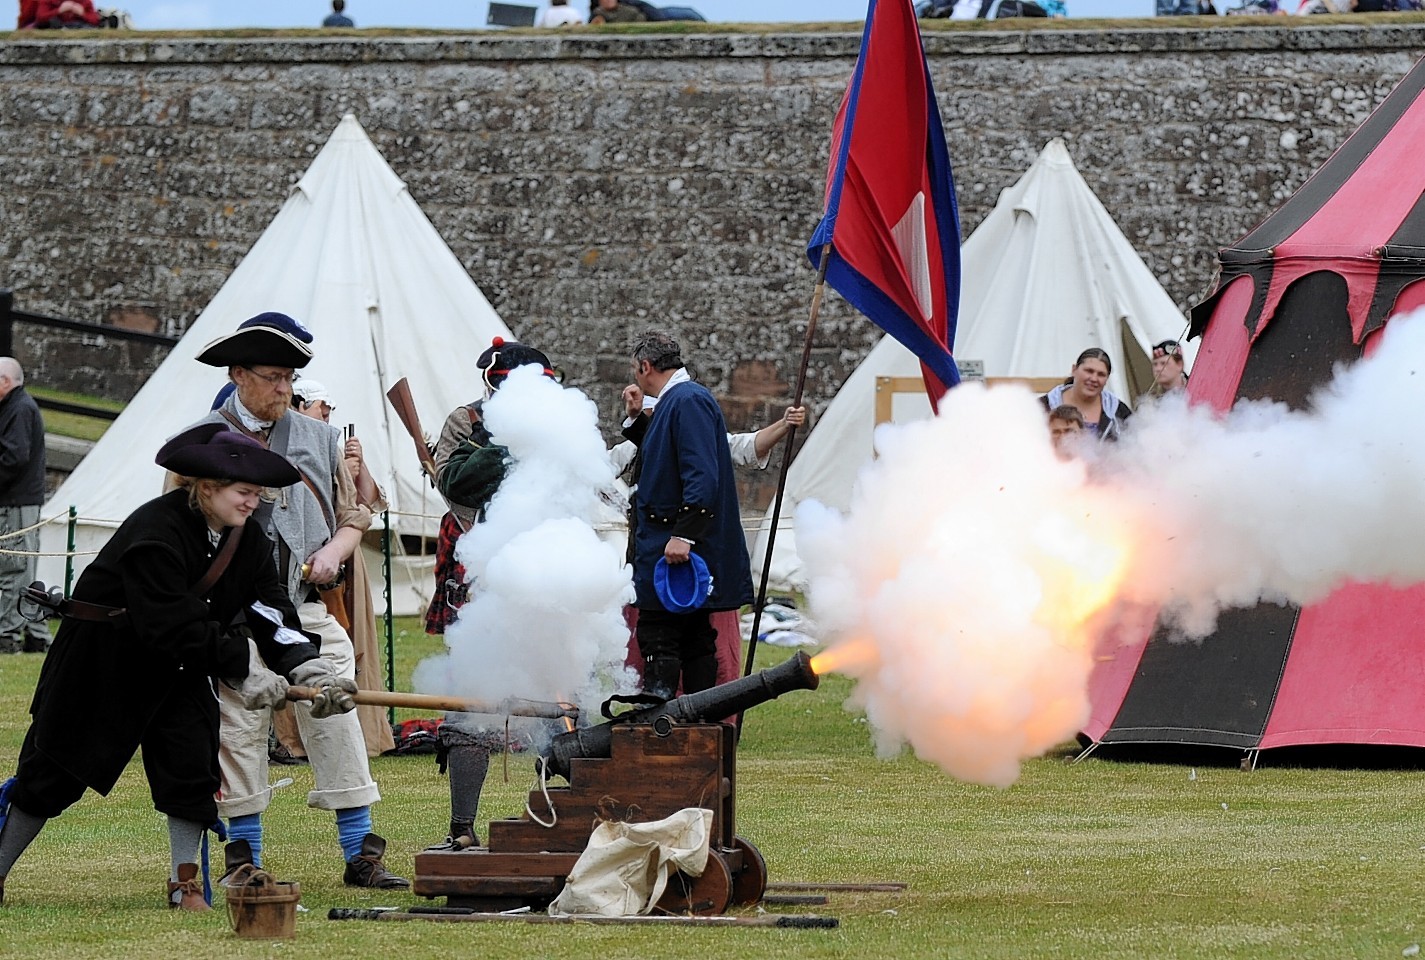 The popular Celebration of the Centuries event returns to Fort George next month.